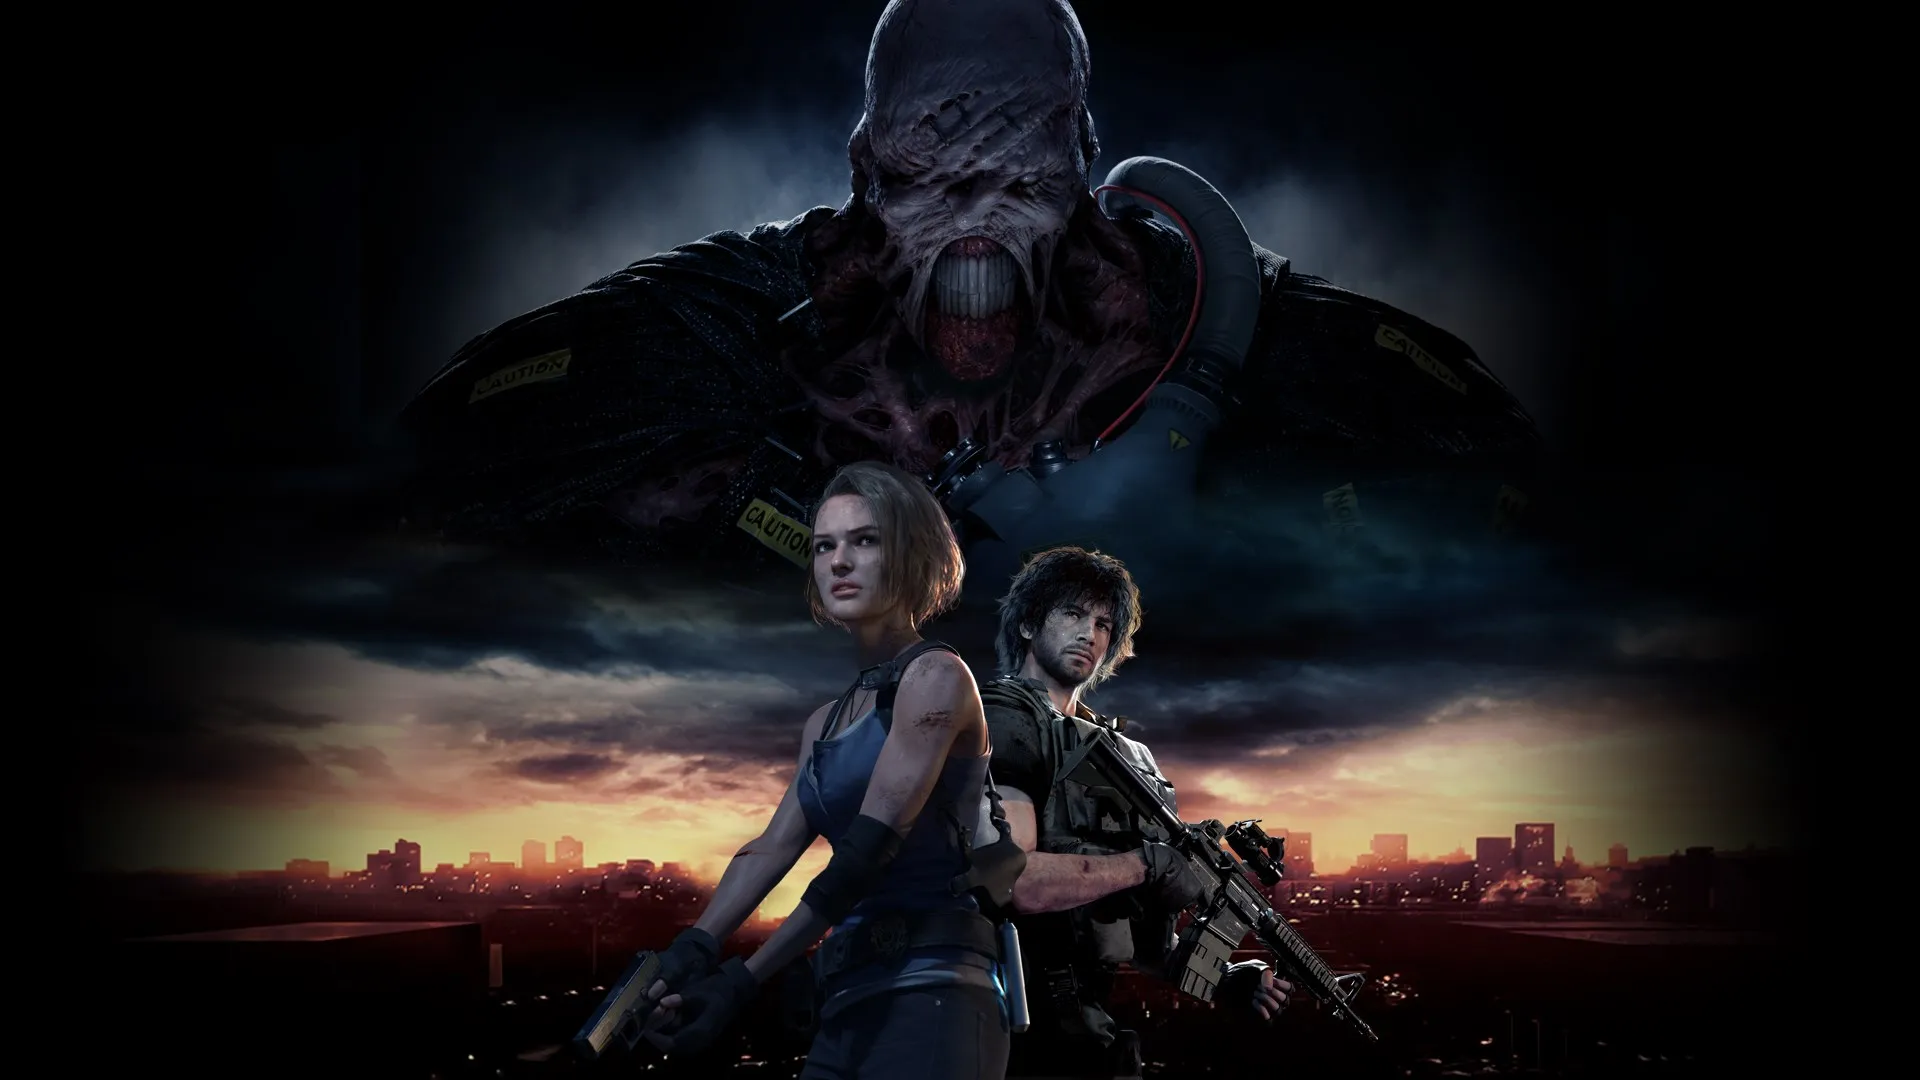  Physical copies of Resident Evil 3 Remake may be delayed, Capcom warns 